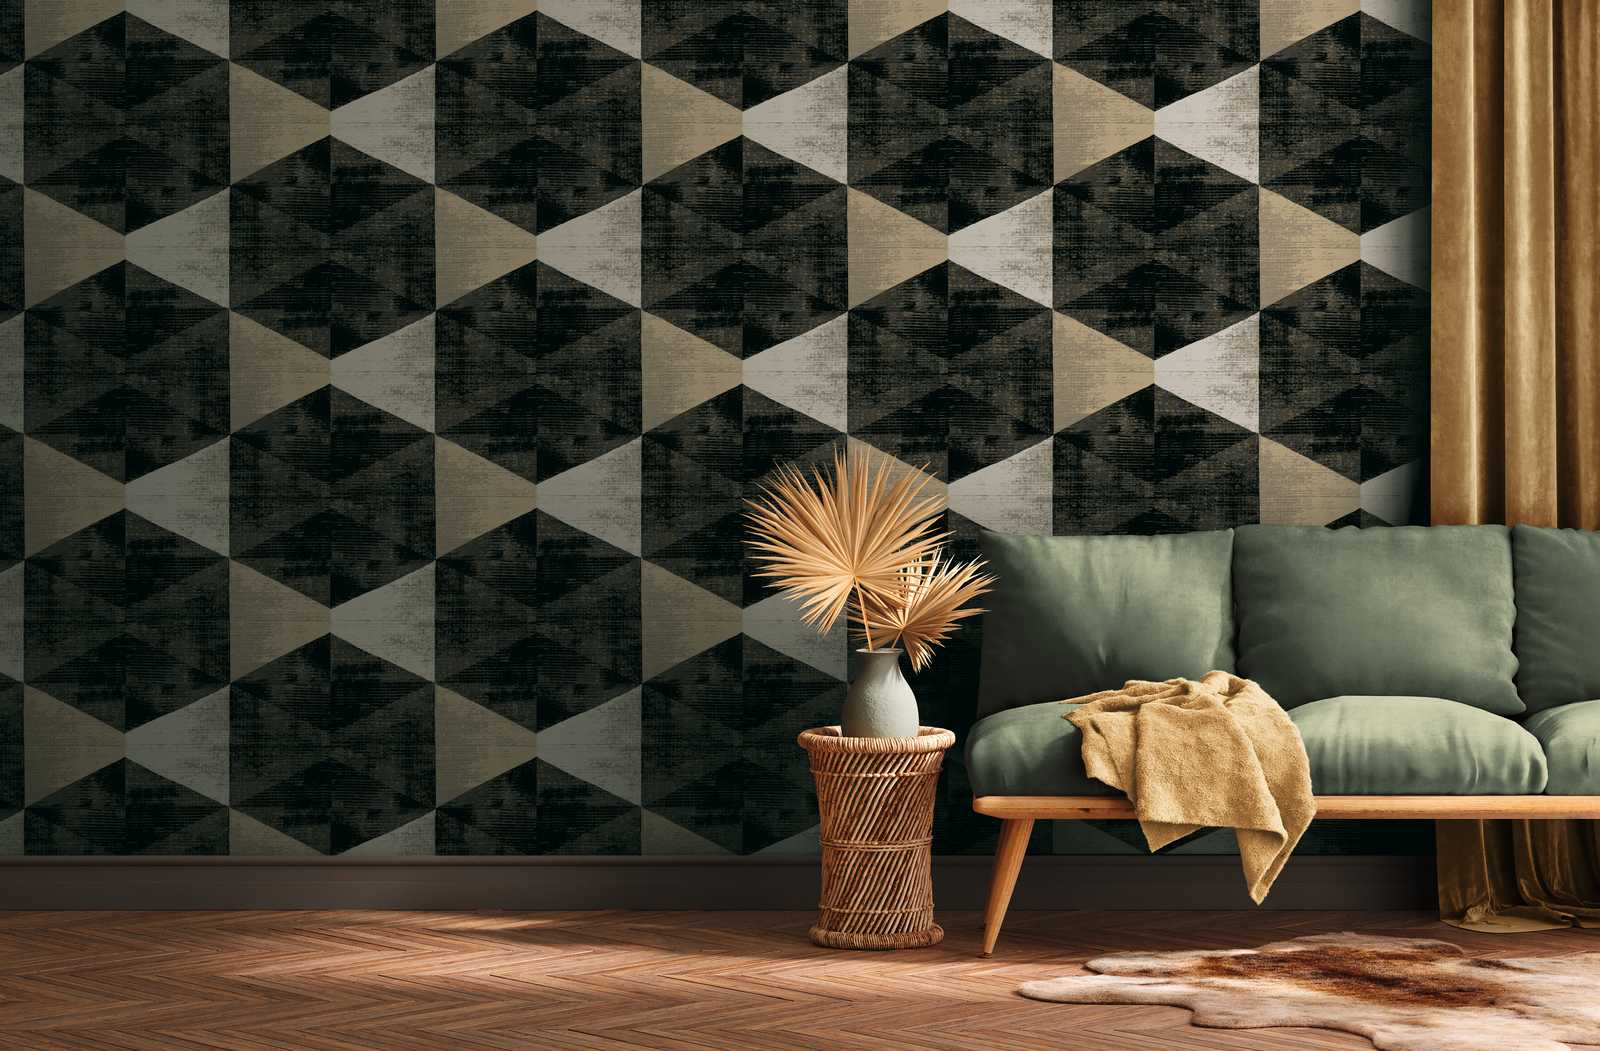             Graphic wallpaper with metallic colours and modern used look - metallic, black, beige
        